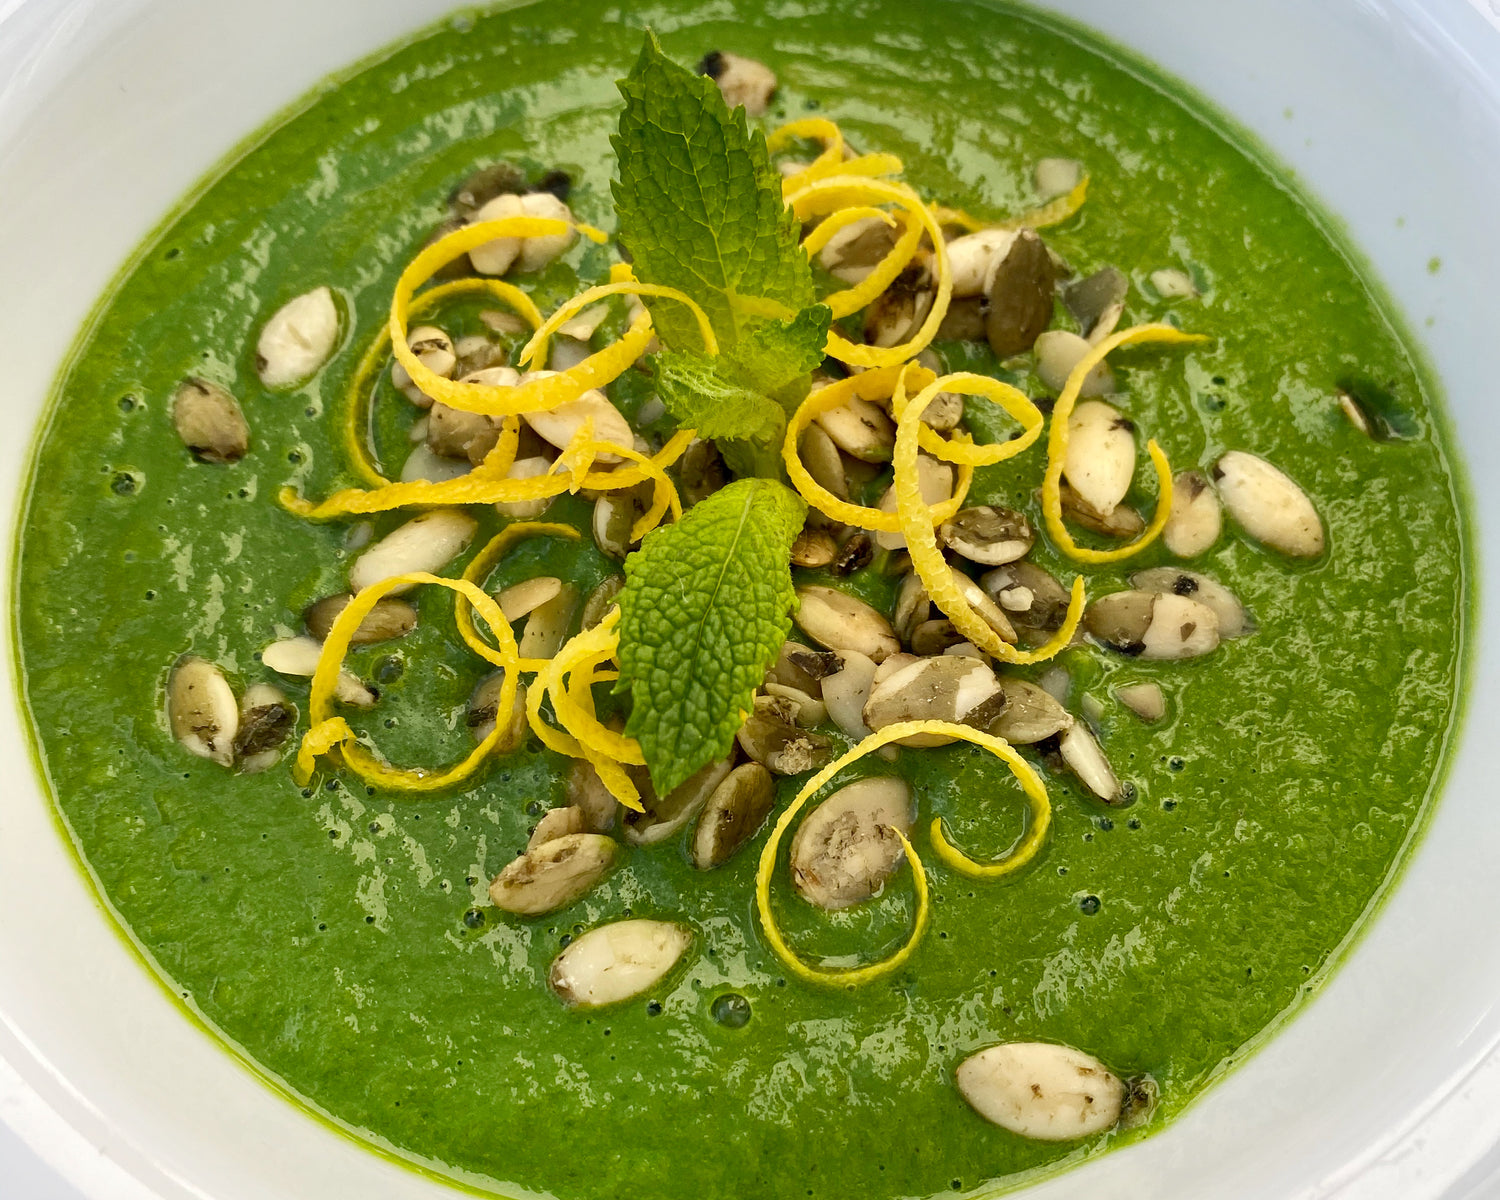 Spring Green Soup with Spinach, Avocado, Asparagus, and Mint